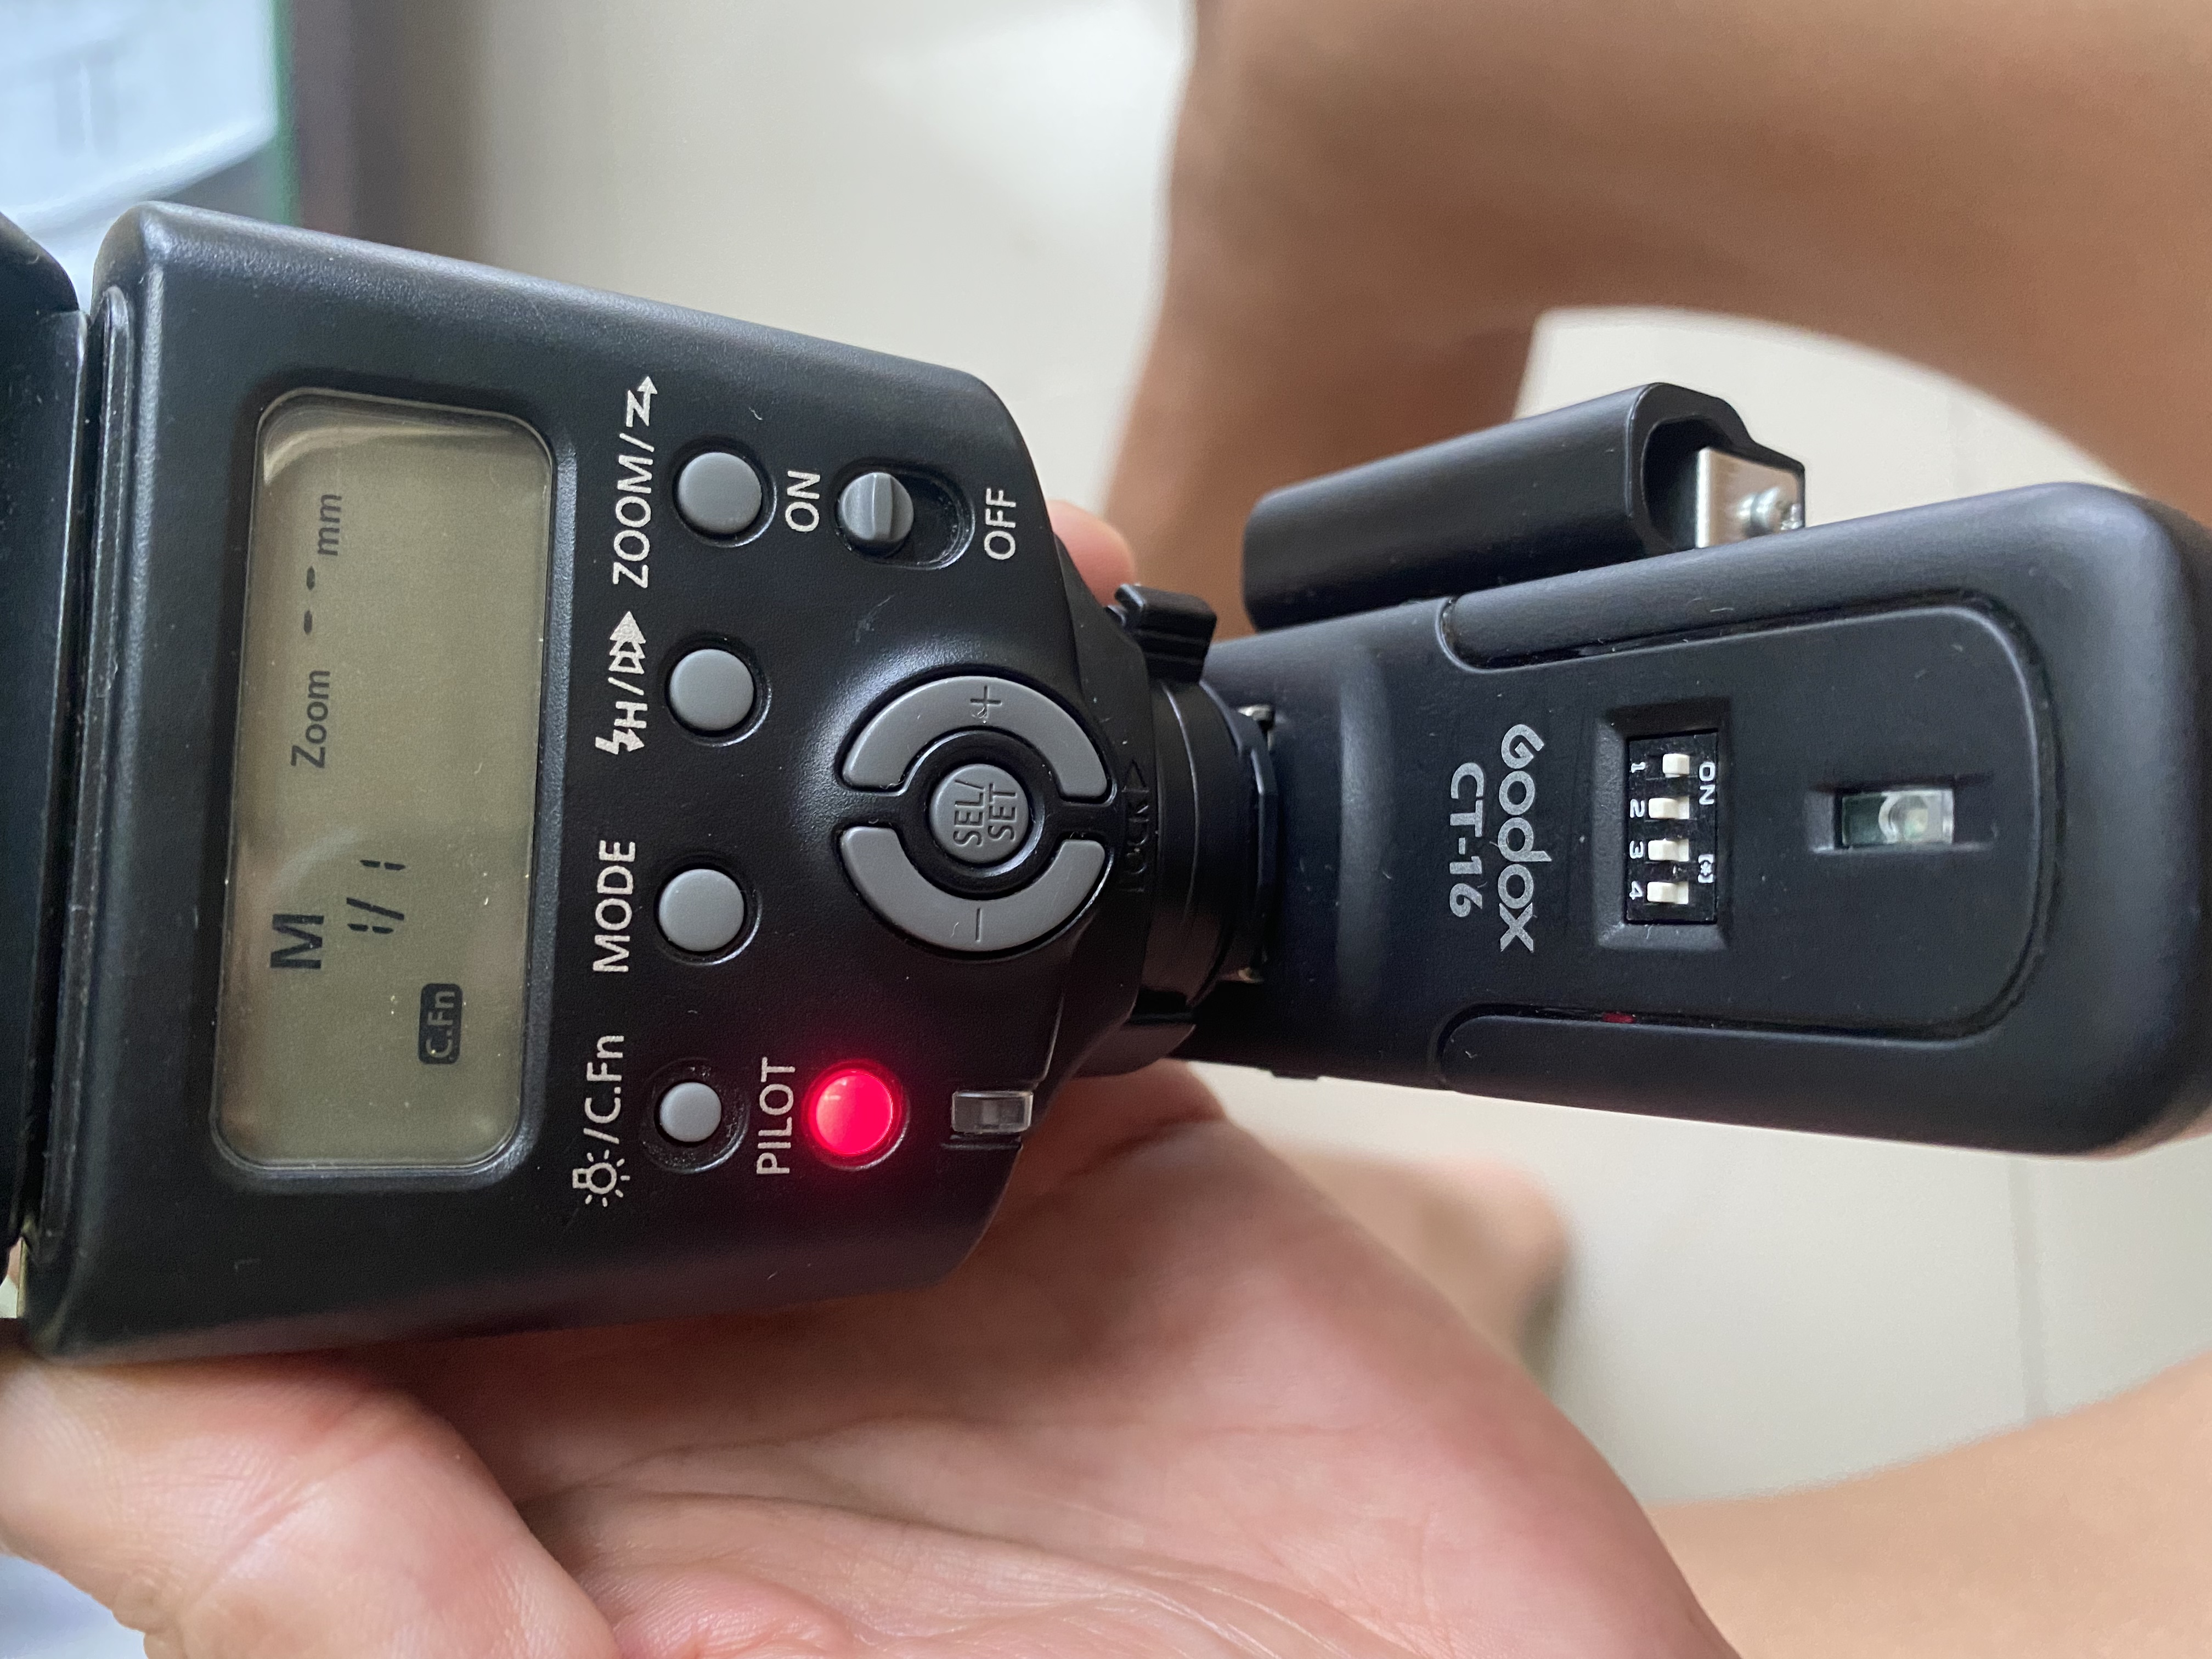 Solved: Help! Godox ct-16 trigger not pairing with 430ii - Canon